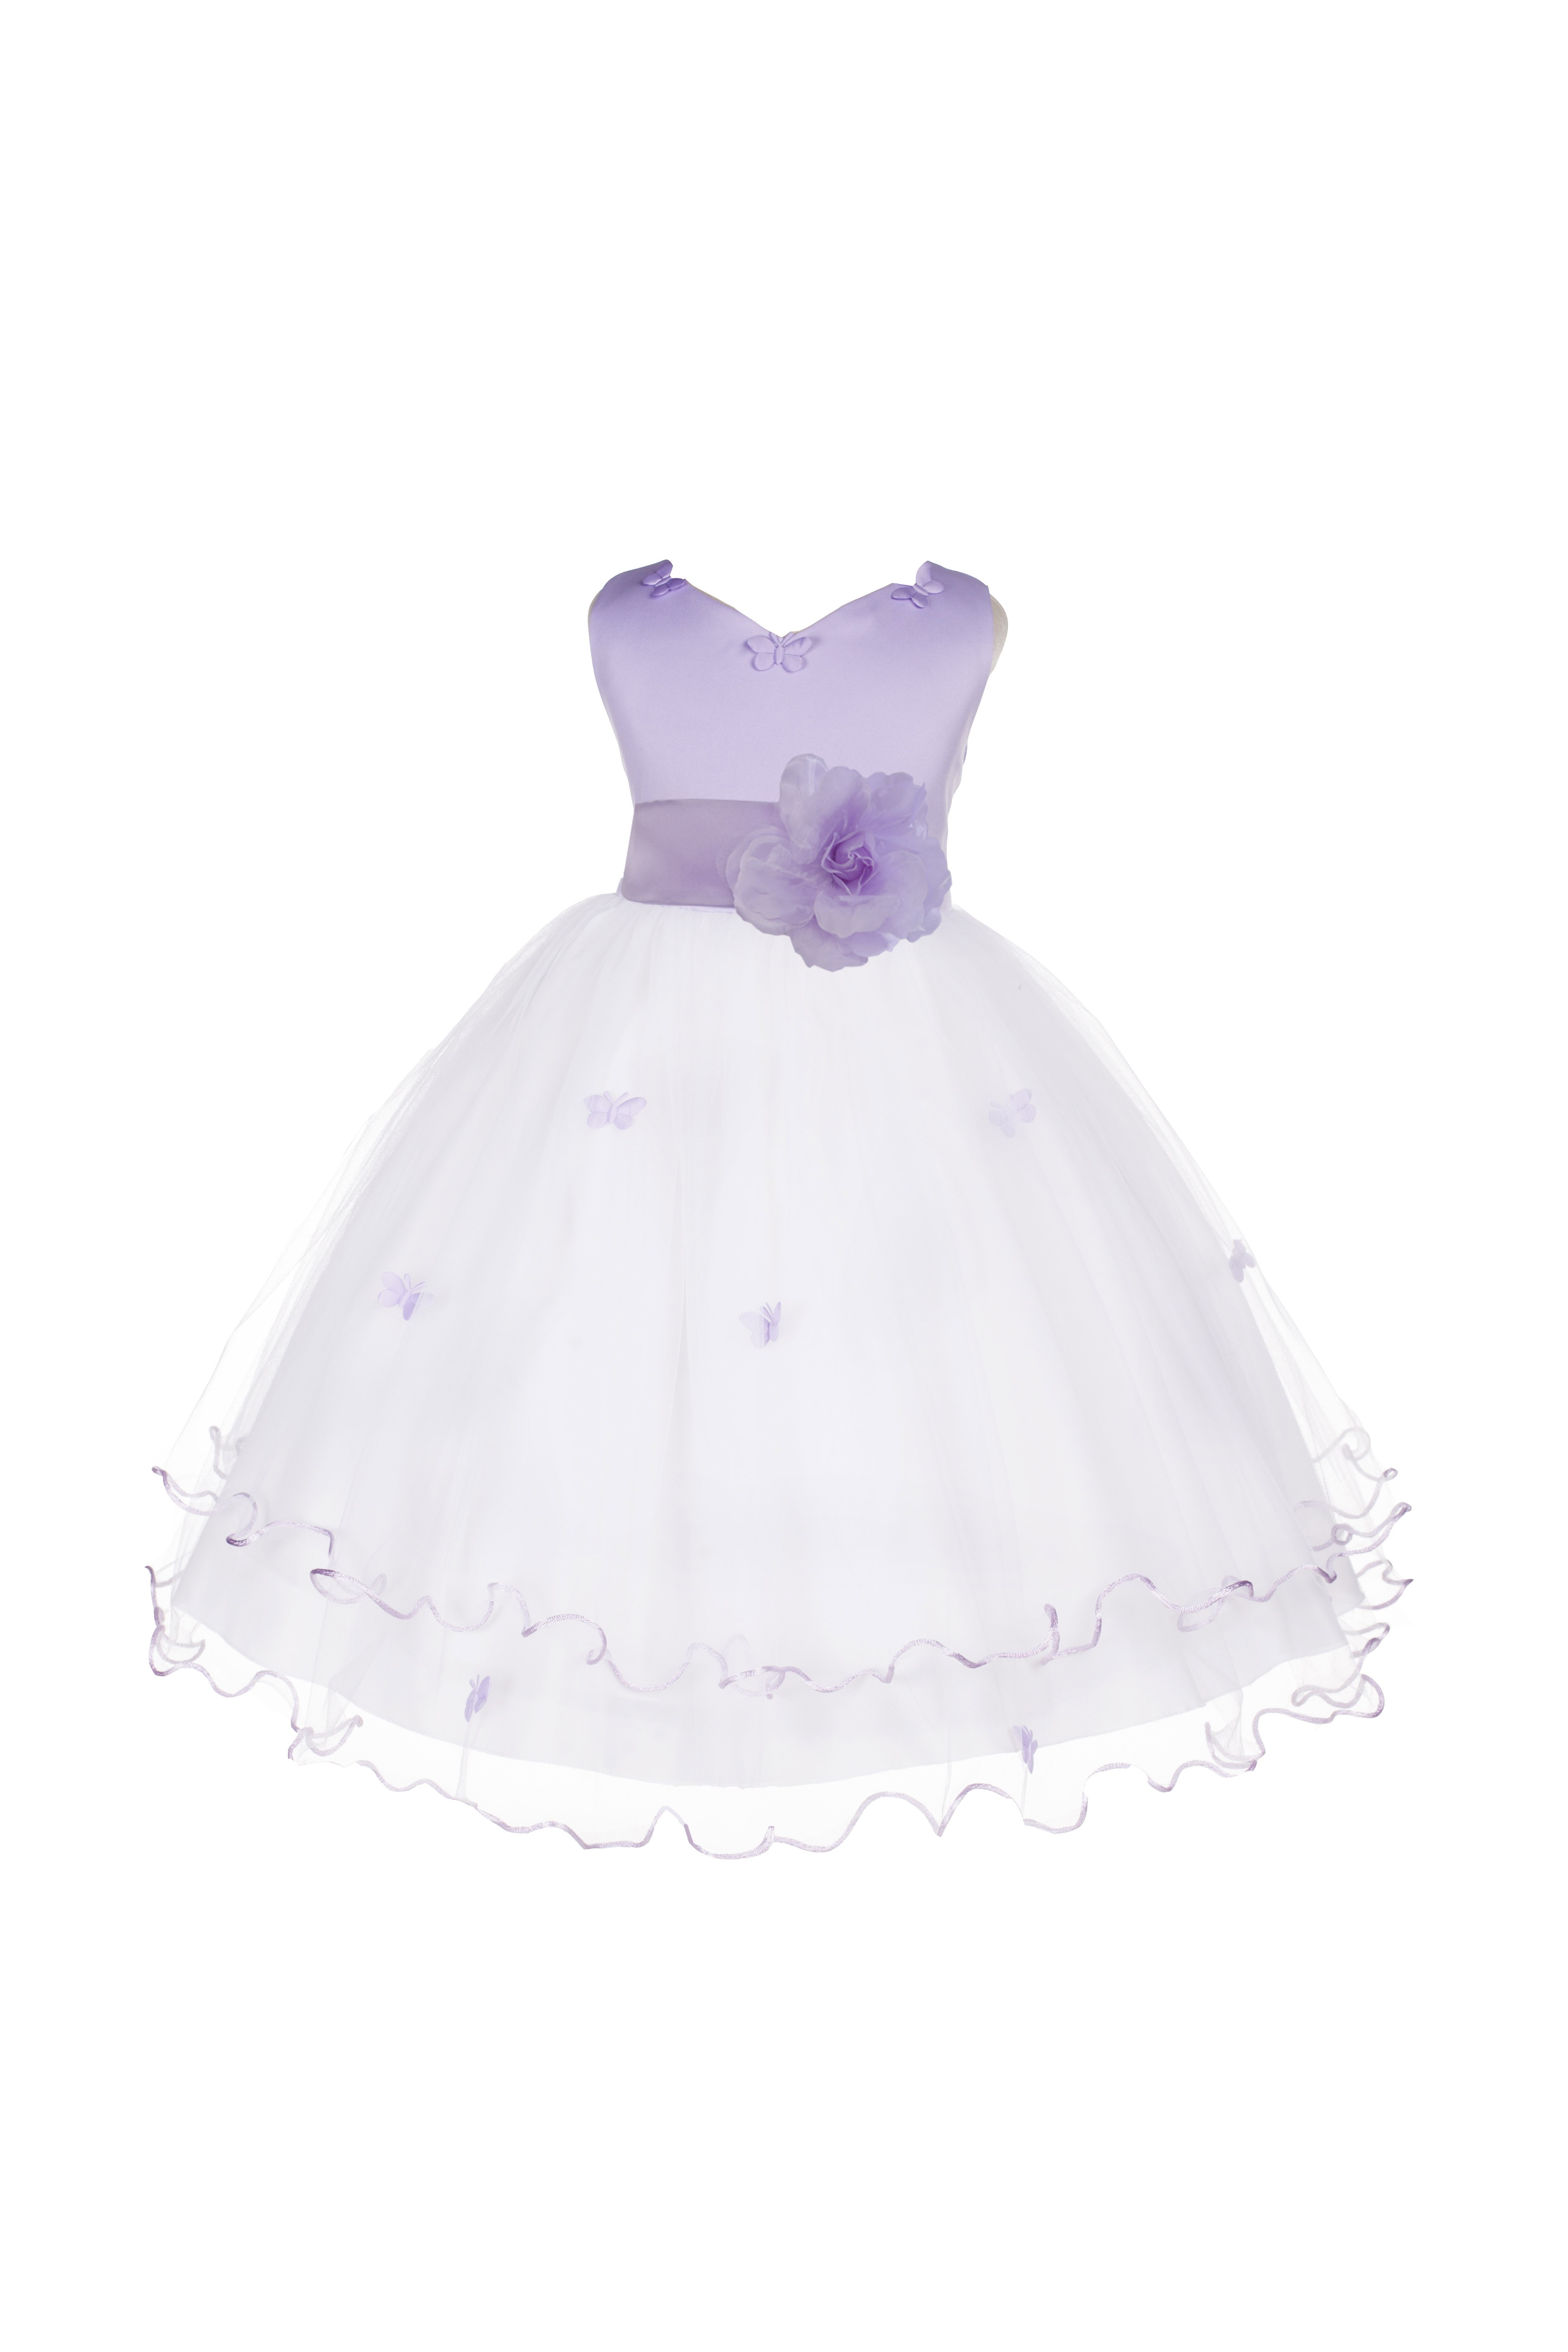 Lilac Satin Tulle Butterflies Flower Girl Dress Occasions 801S